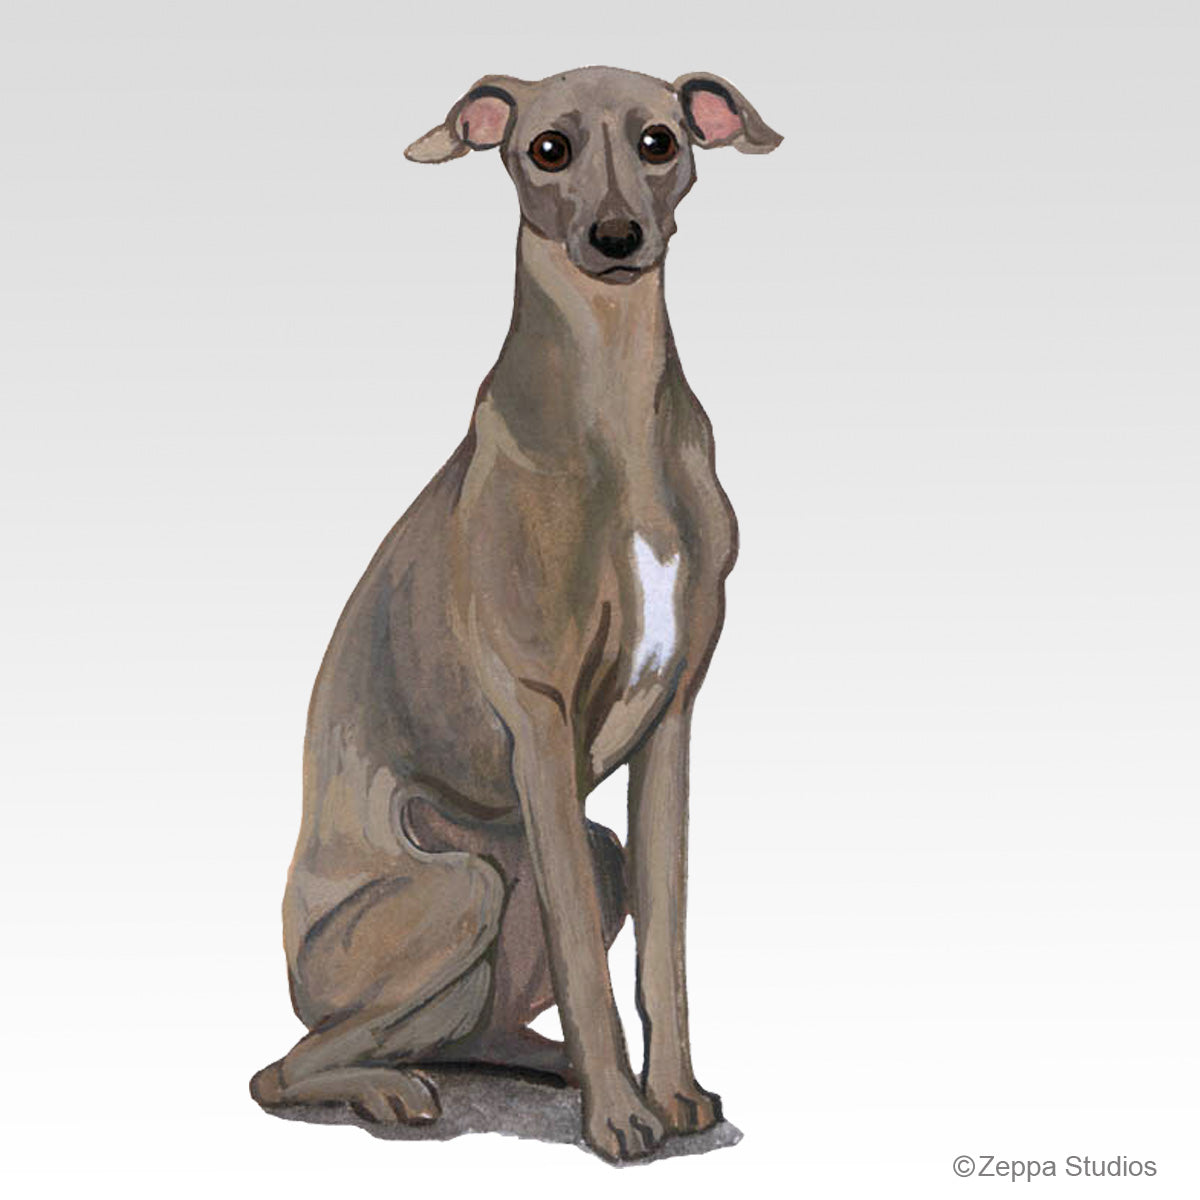 Link to Italian Greyhound Gifts